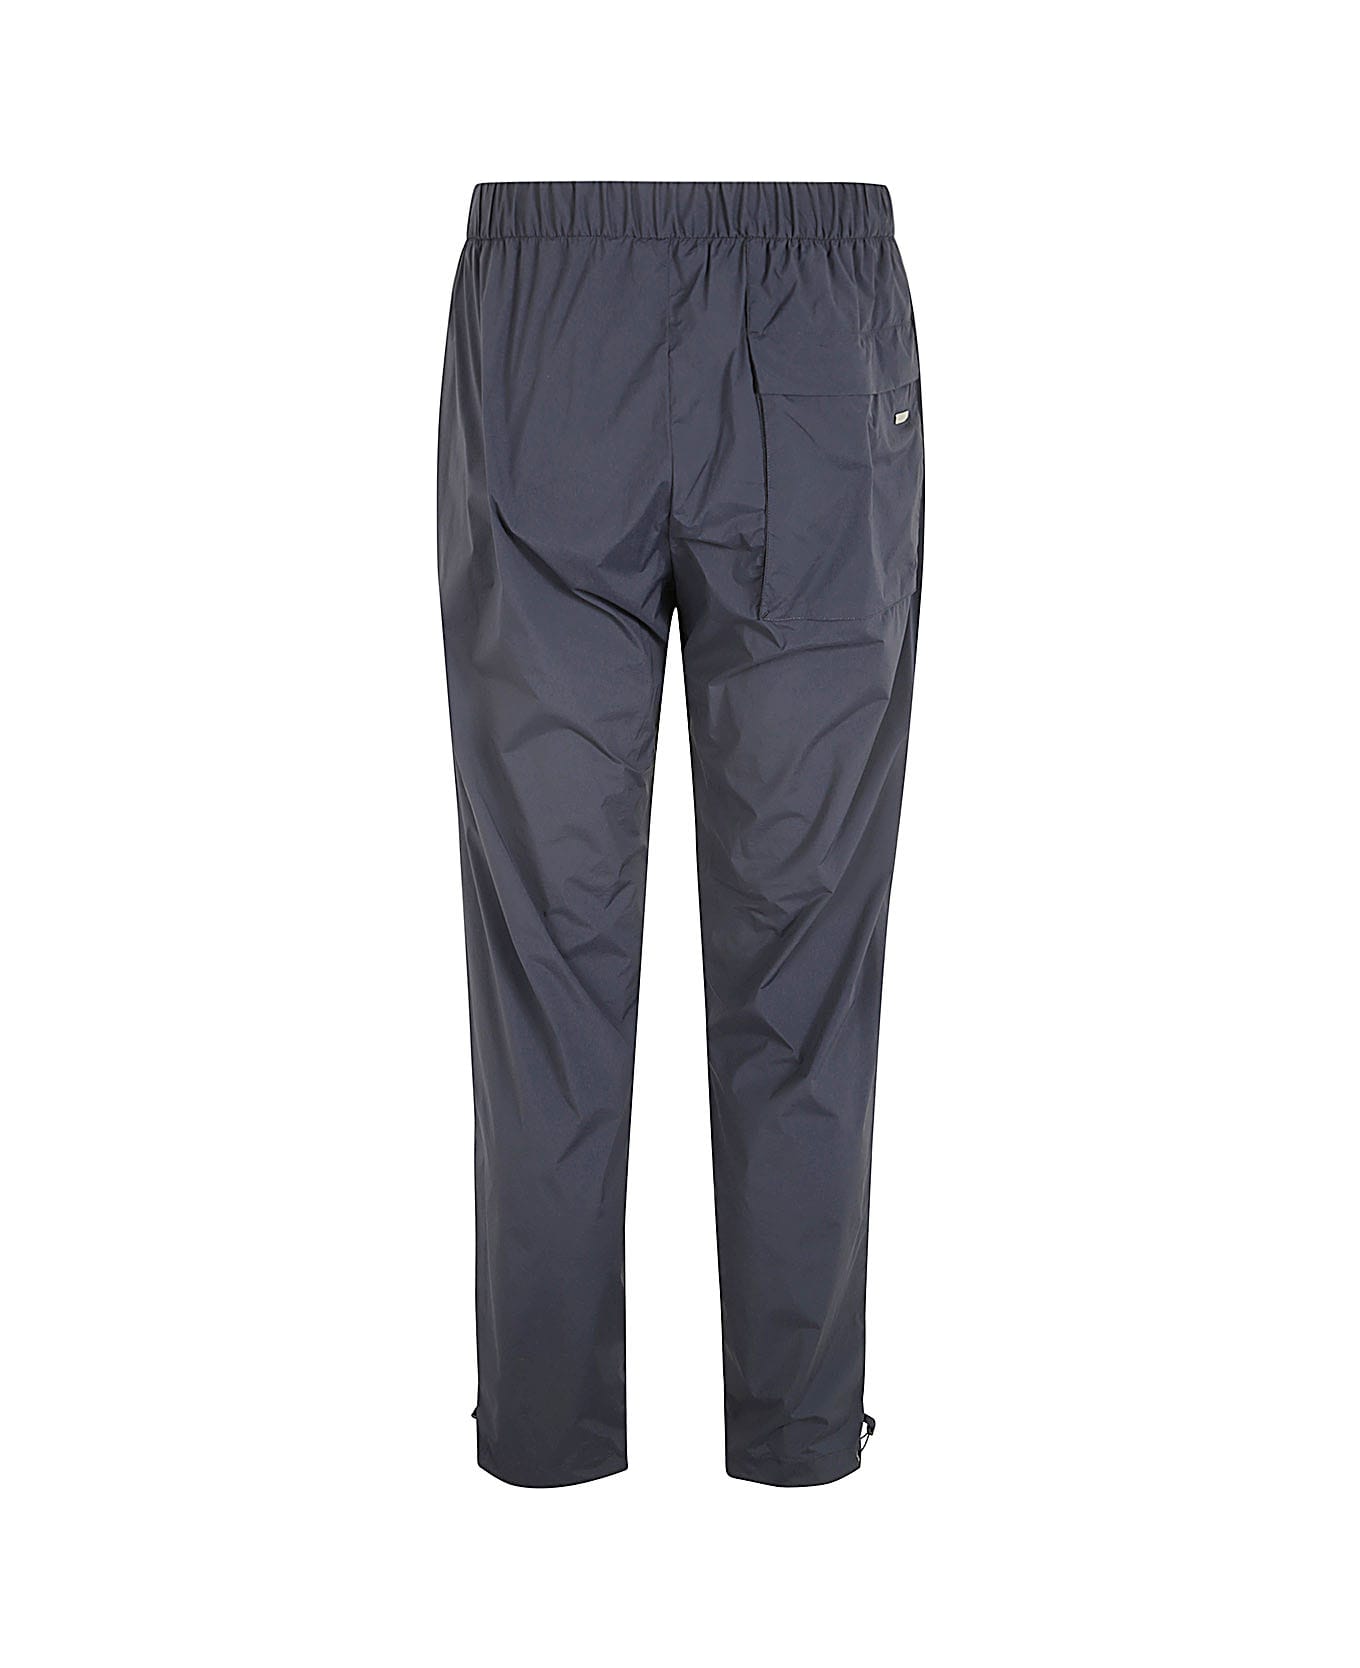 Herno Trousers - Navy Blue